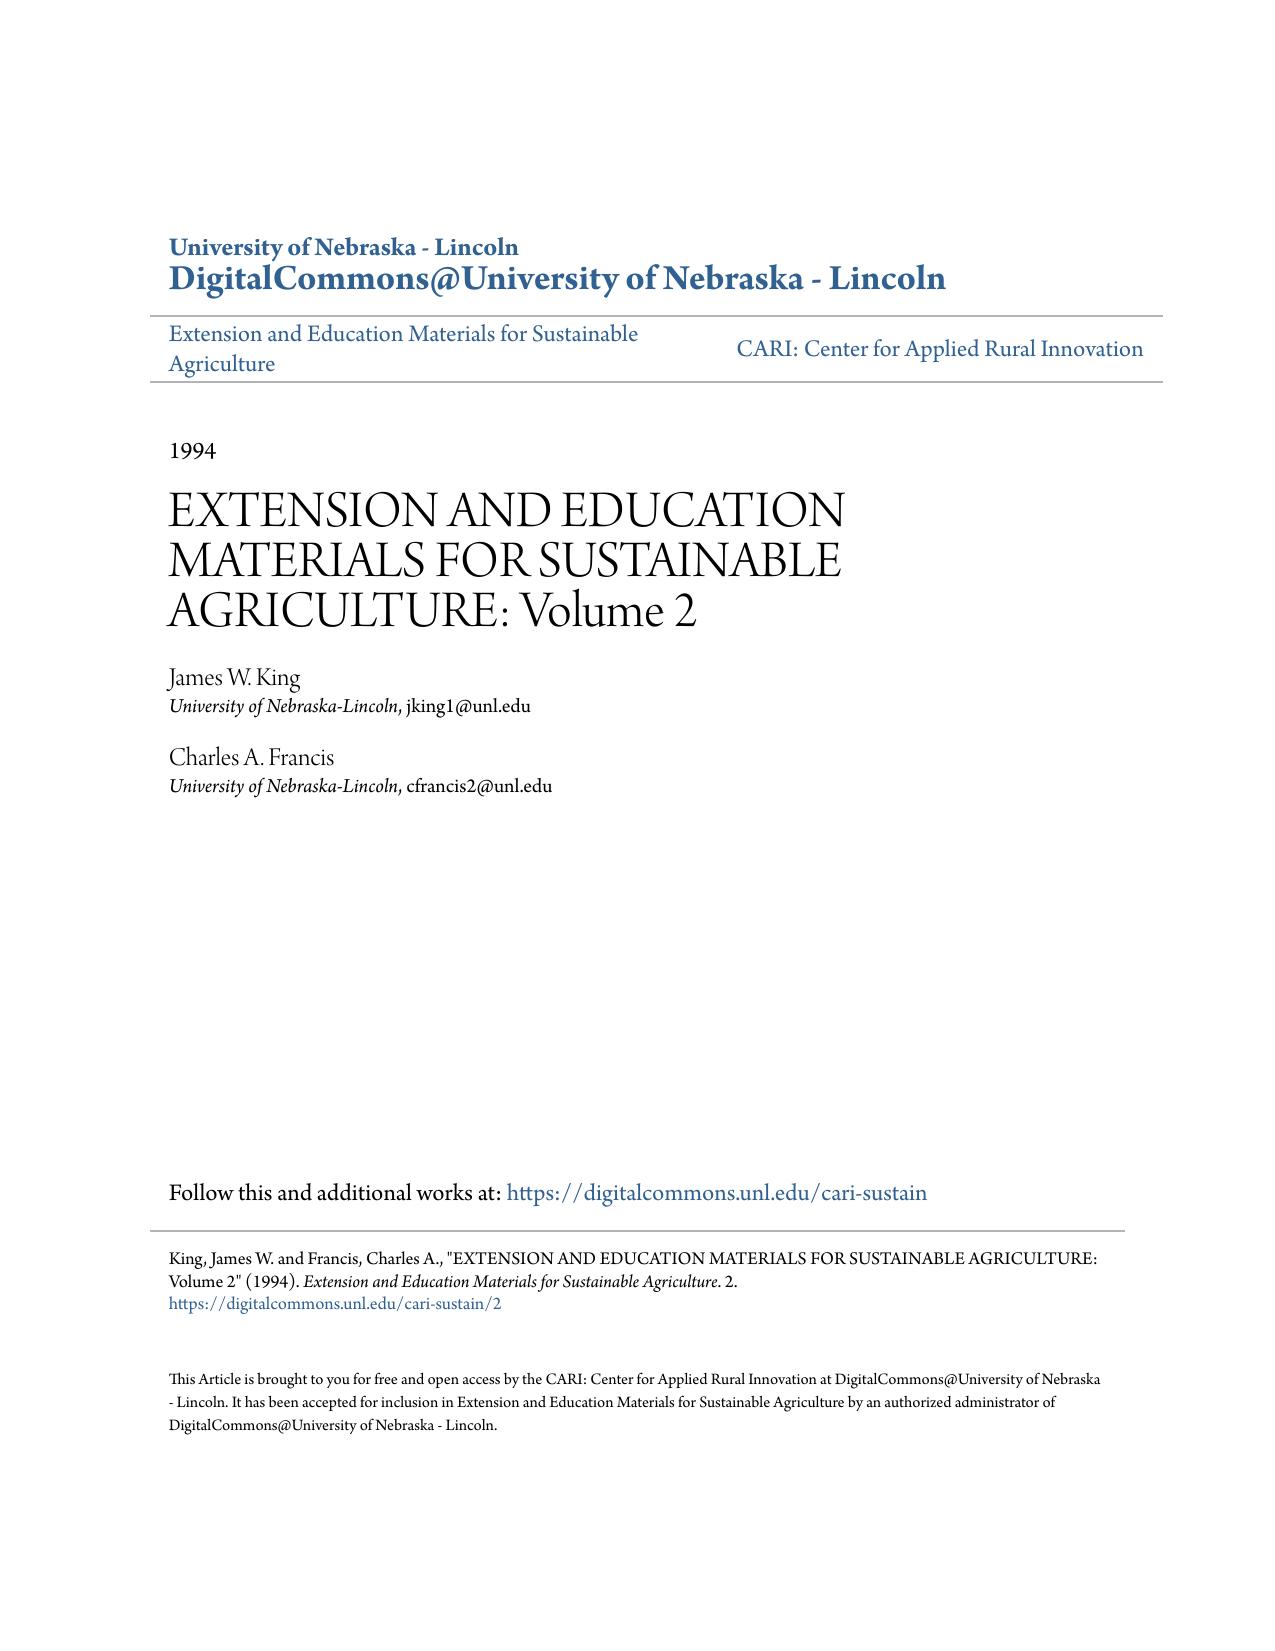 EXTENSION AND EDUCATION
MATERIALS FOR
SUSTAINABLE AGRICULTURE:
Volume 2